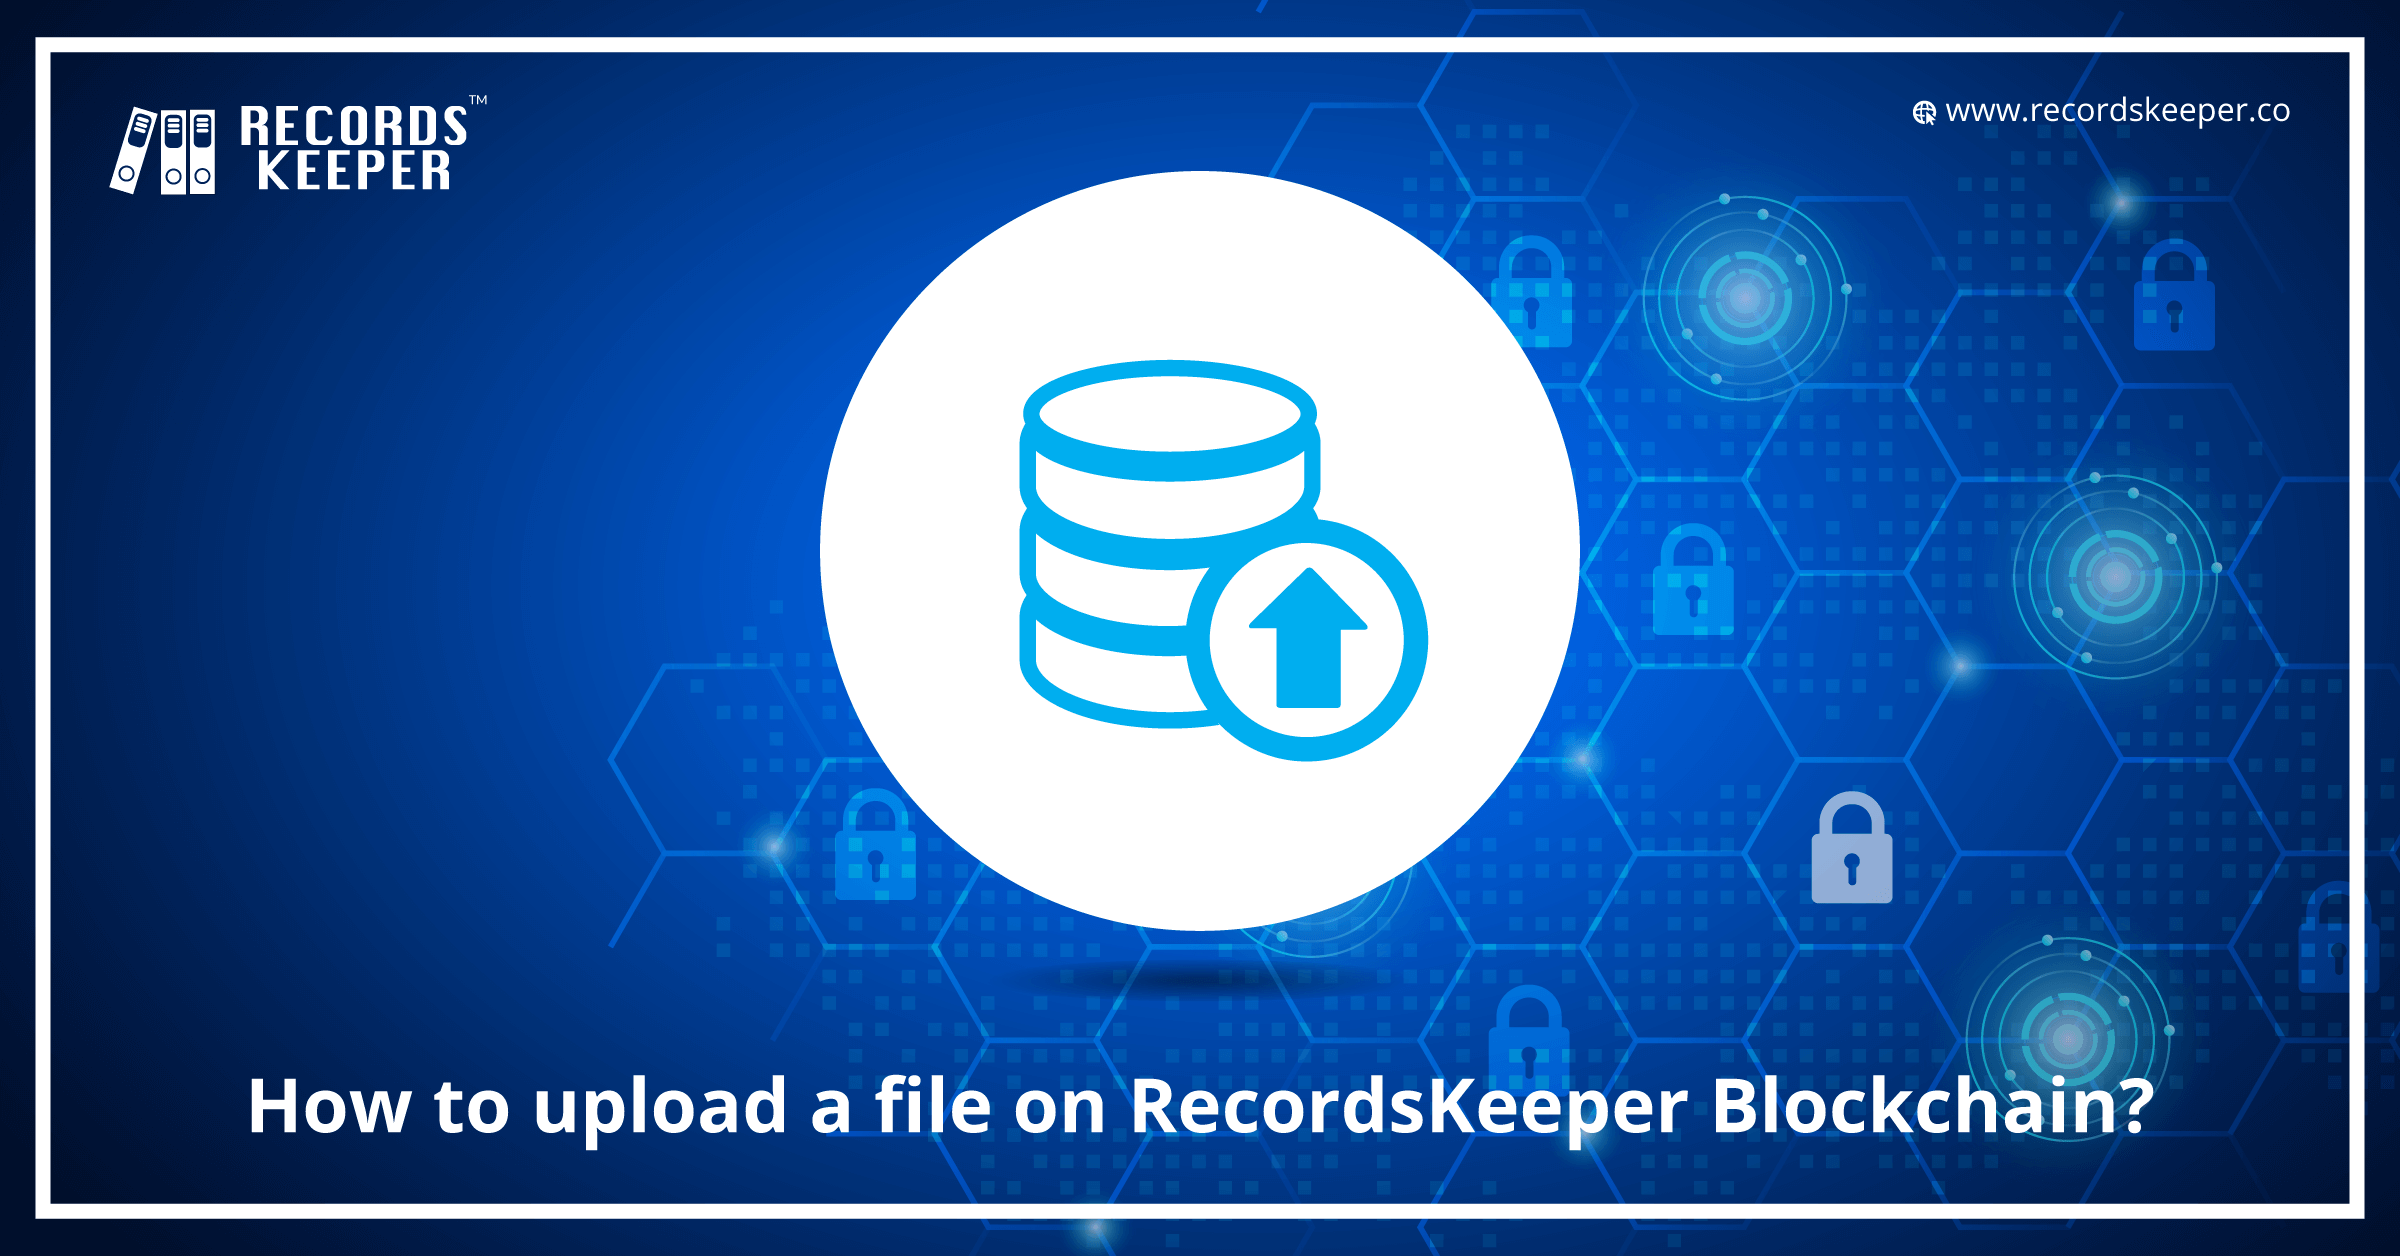 How to upload a file on RecordsKeeper Blockchain?